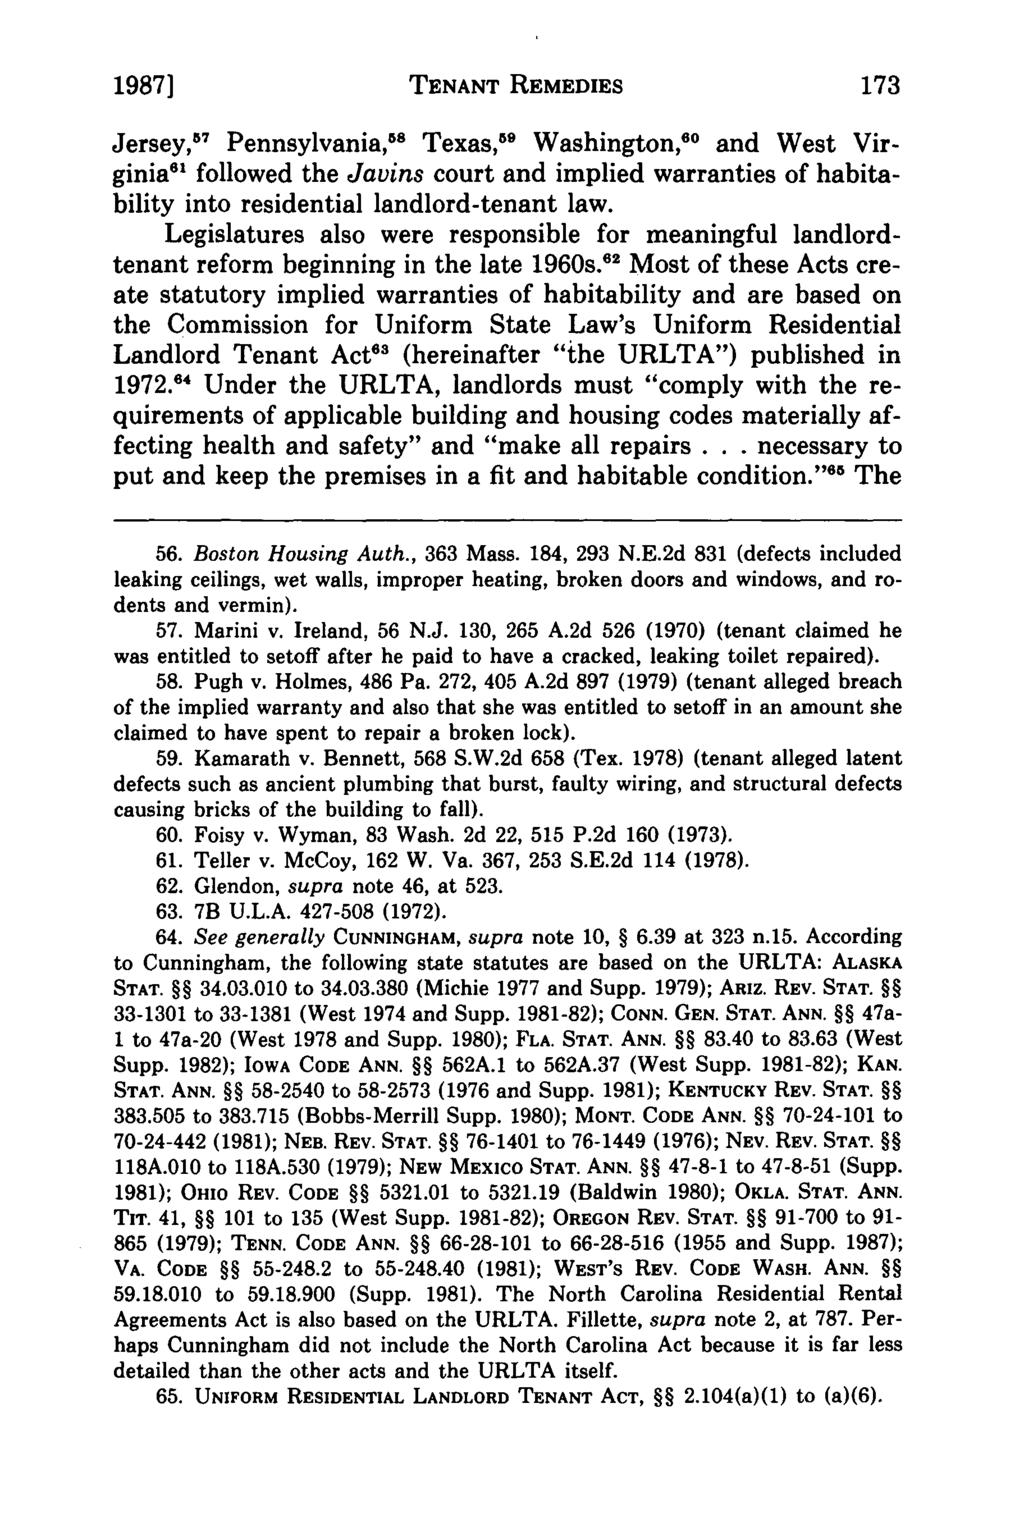 1987] Foster: Property Law - A Fresh Look at Contractual Tenant Remedies under TENANT REMEDIES Jersey, 57 Pennsylvania, 58 Texas, 59 Washington," and West Virginia 6 followed the Javins court and